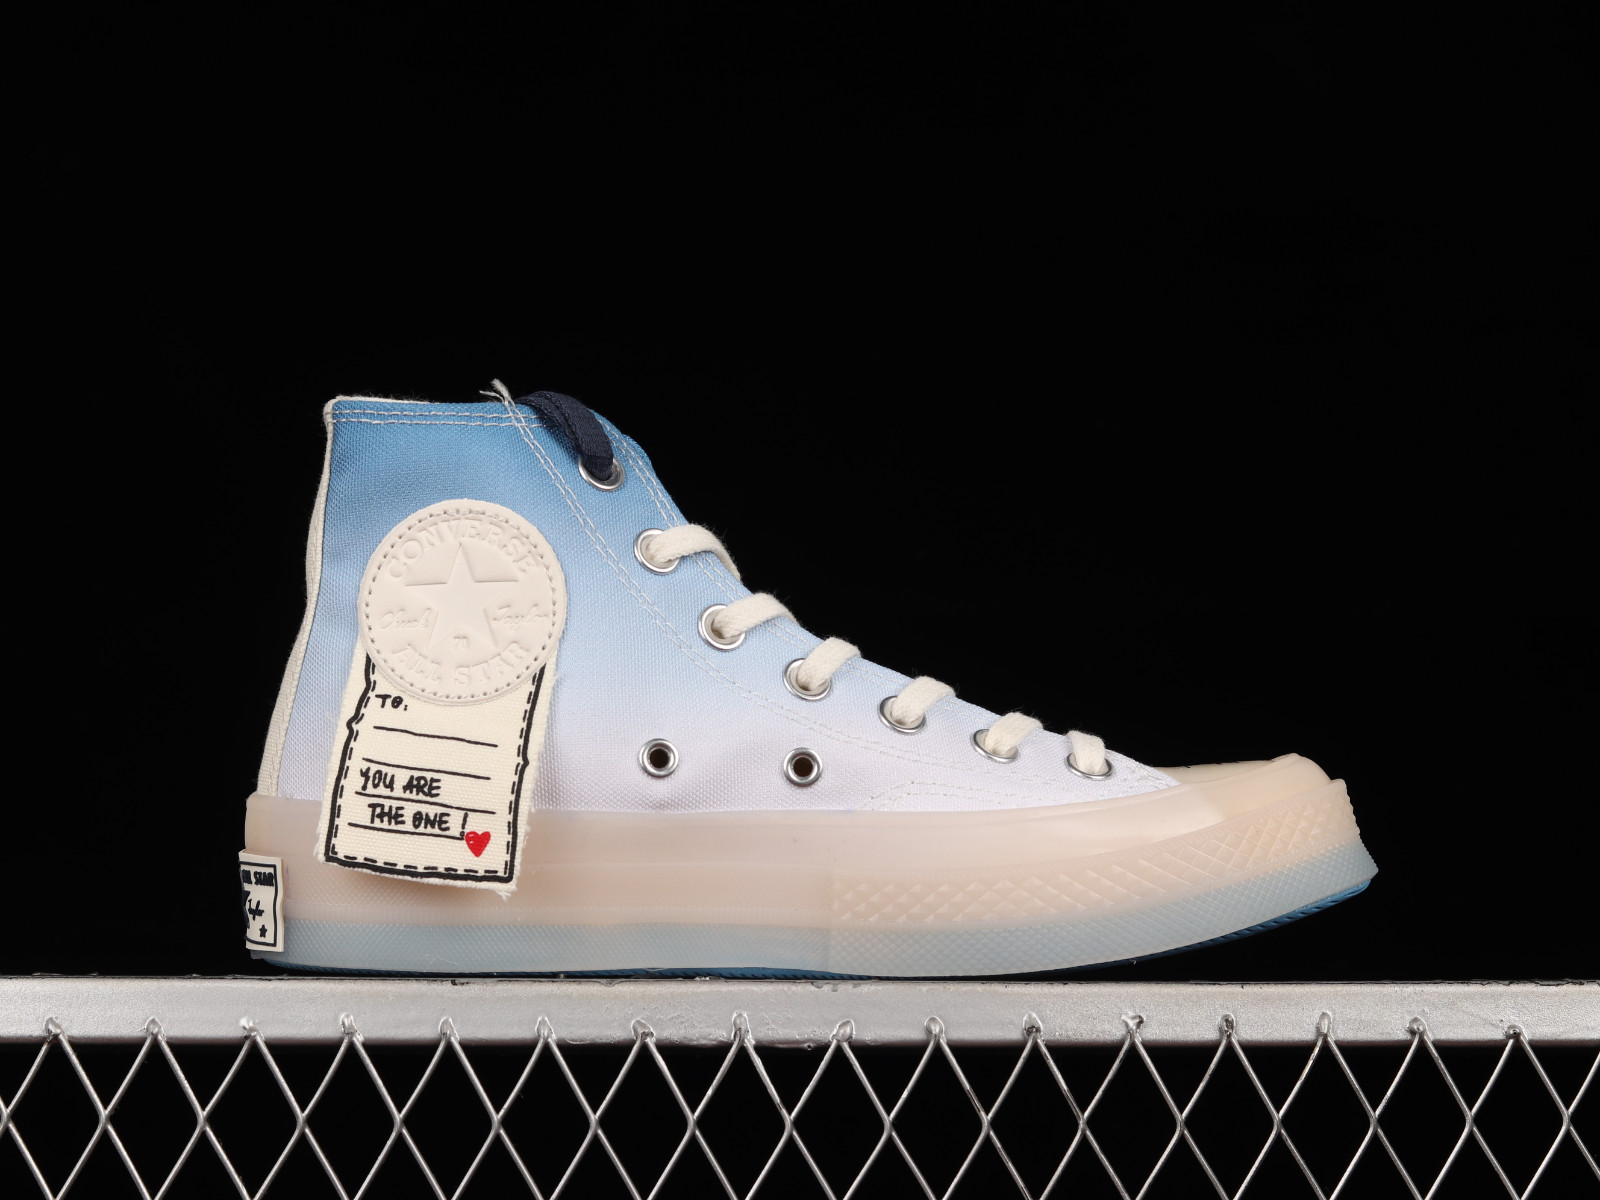 You Are The One x Converse Chuck 70s High Blue Cream White A03747C -  GmarShops - Ronnie Fieg x Converse Star Player 75 Hi Deluxe